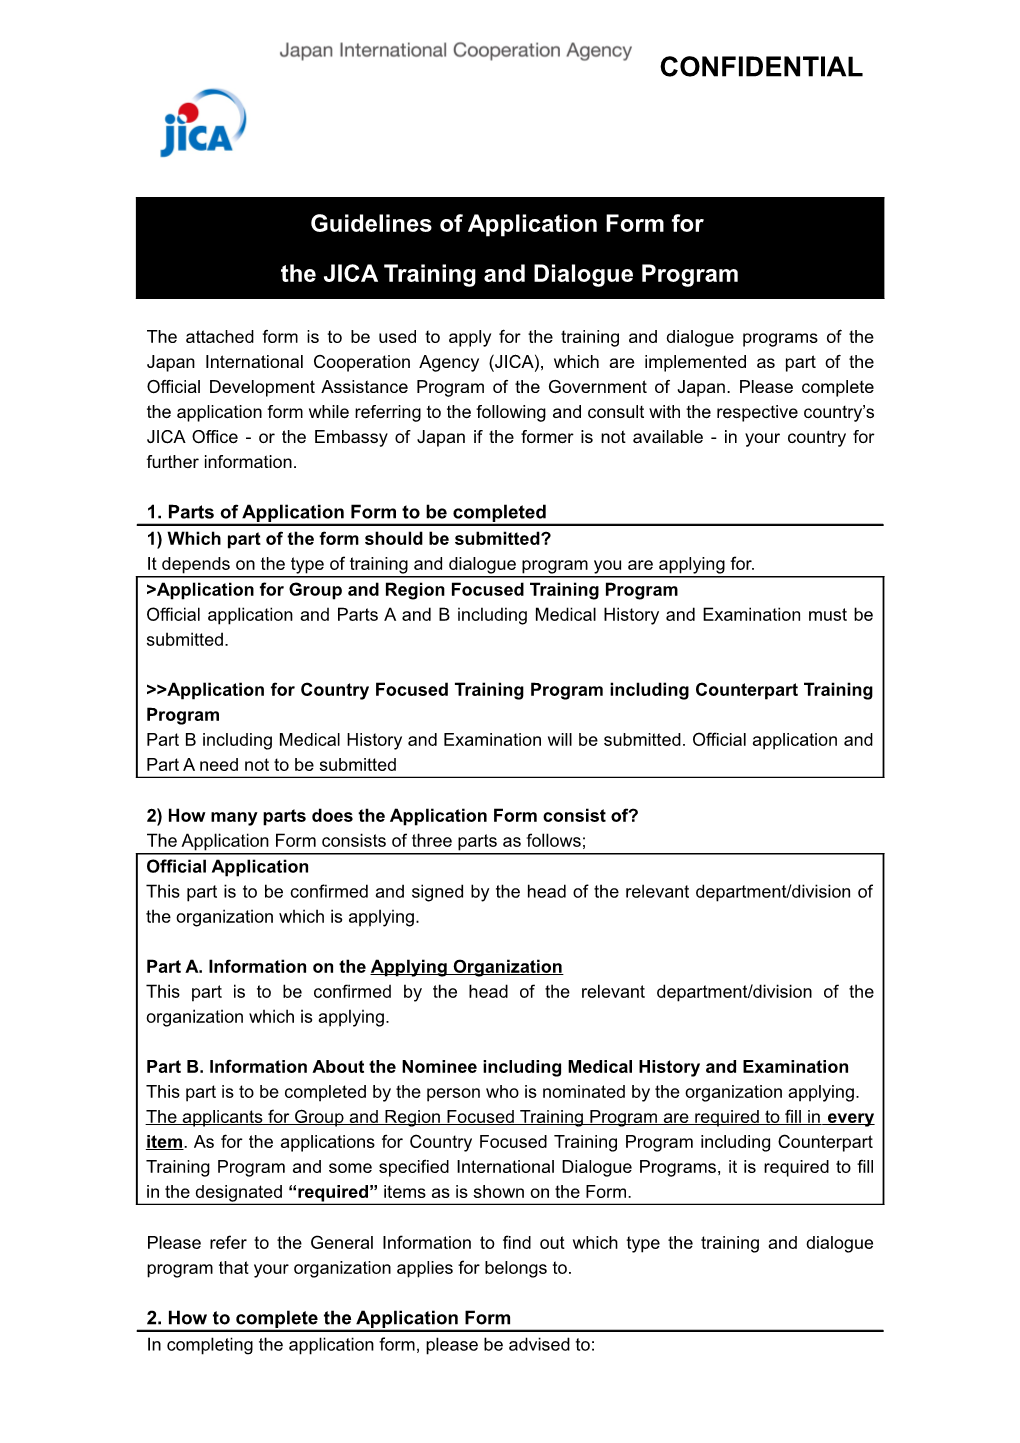 Application Form for JICA Training and Dialogue Programs s7